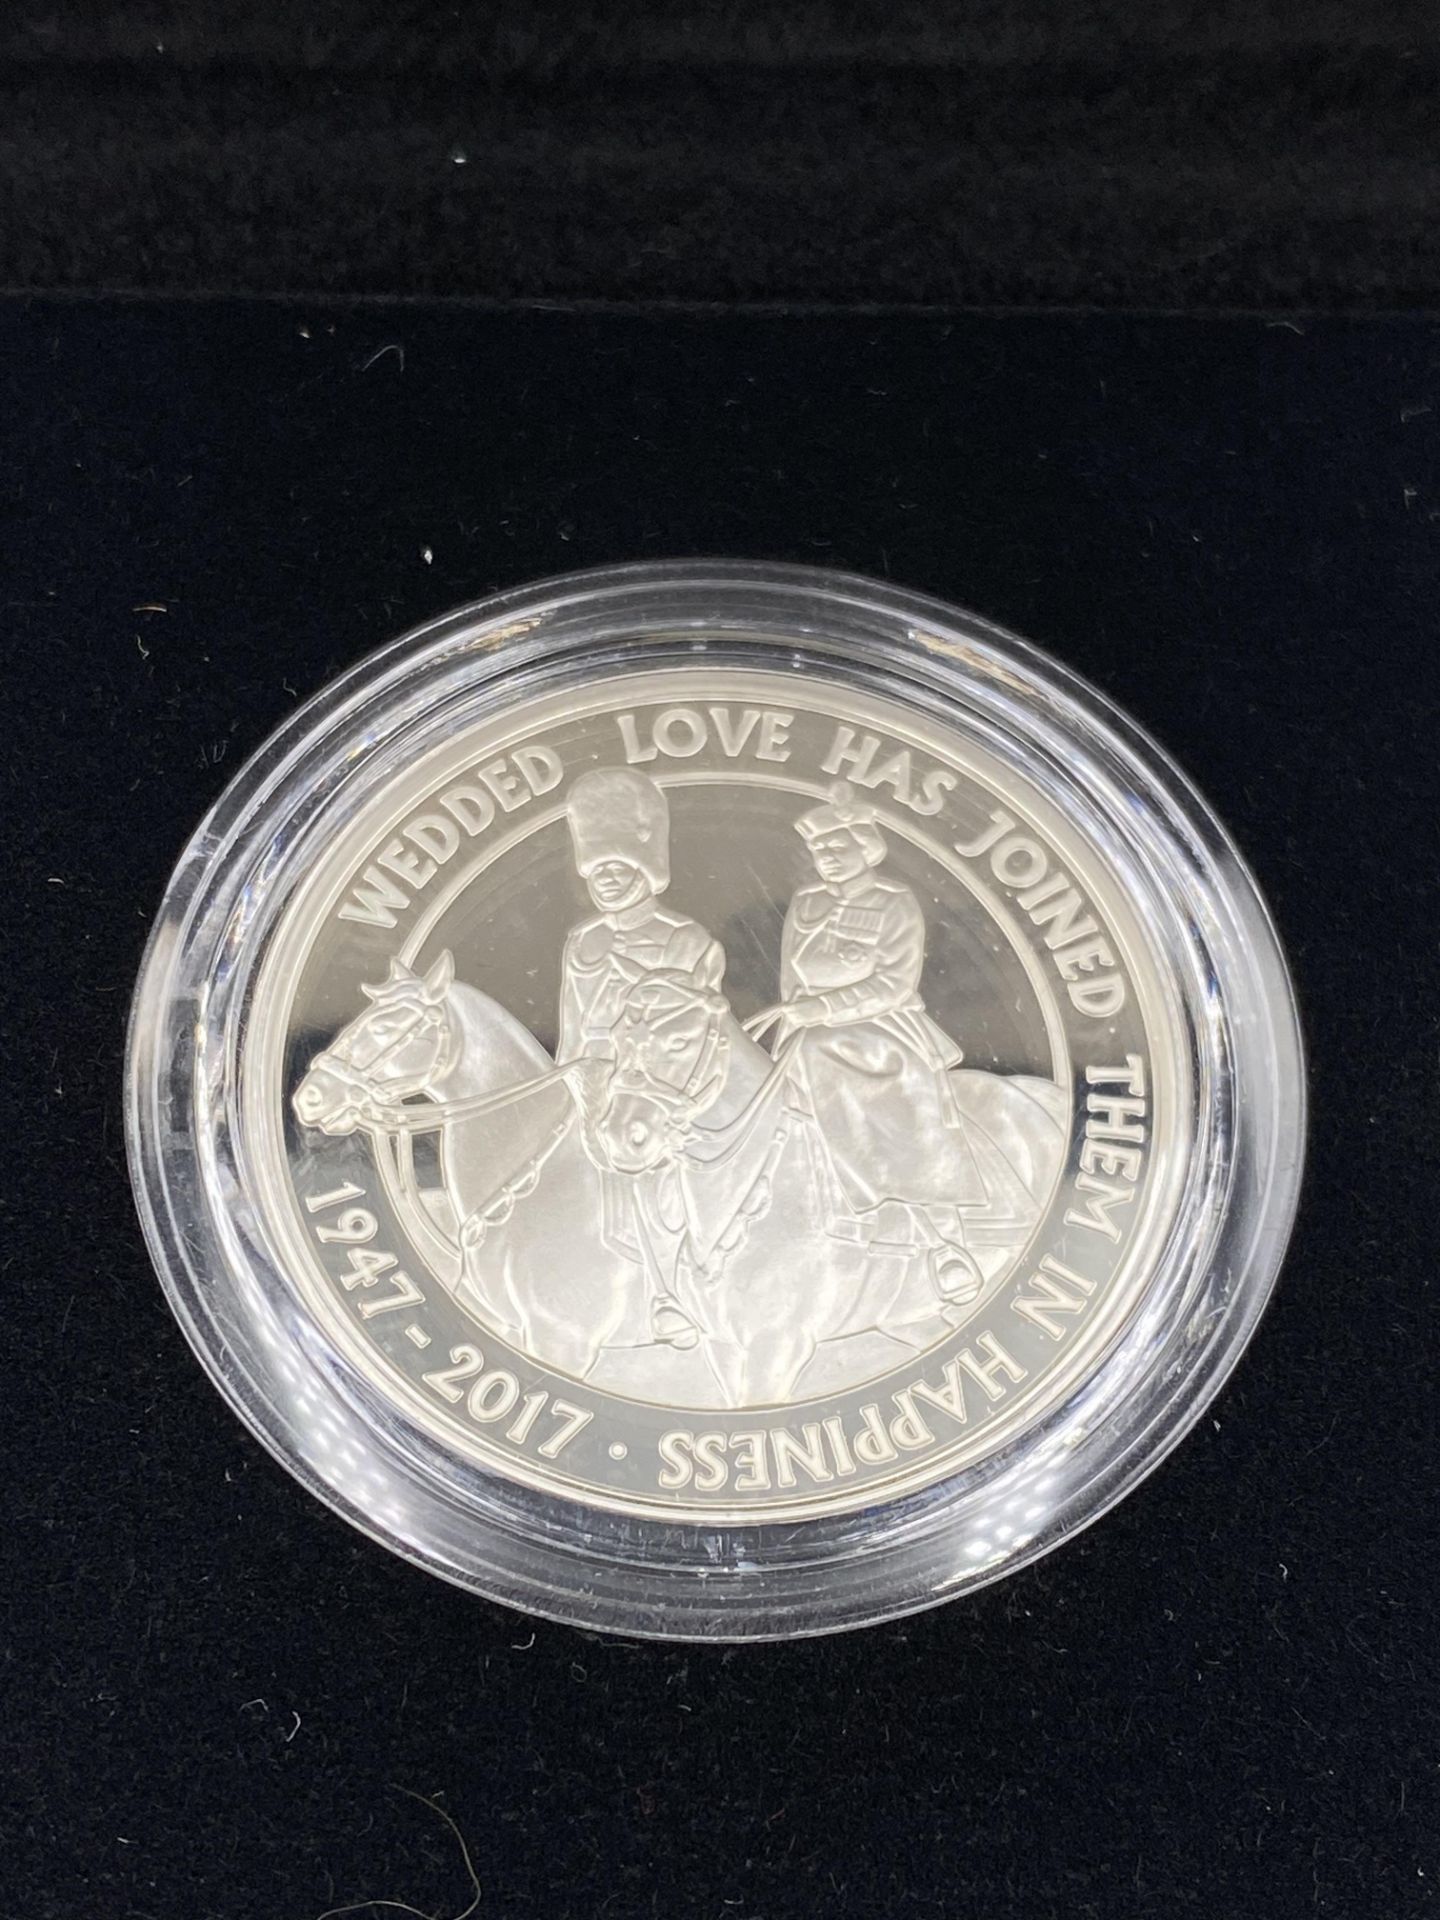 Royal Mint Platinum Wedding Anniversary 2017 £5 silver proof coin - Image 2 of 4